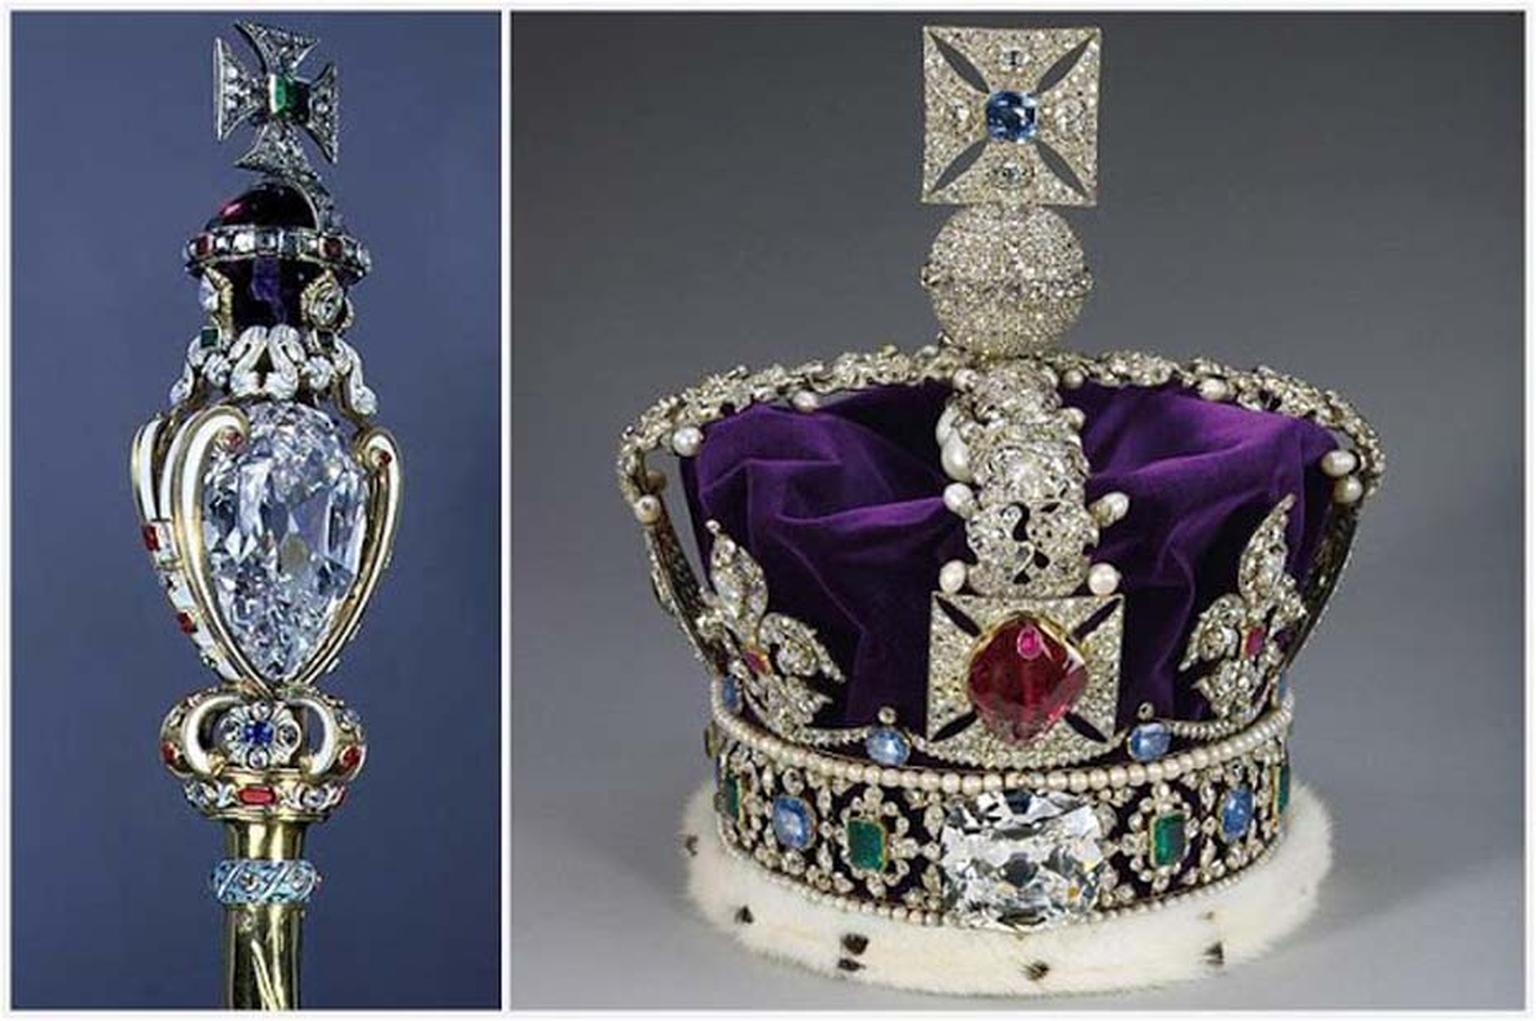 After Joseph Asscher cut the enormous 3,106ct Cullinan diamond in 1902, the two biggest diamonds, Cullinan I and Cullinan II, were set into the Sovereign’s Sceptre and the Imperial State Crown, both of which are part of the British Crown Jewels.